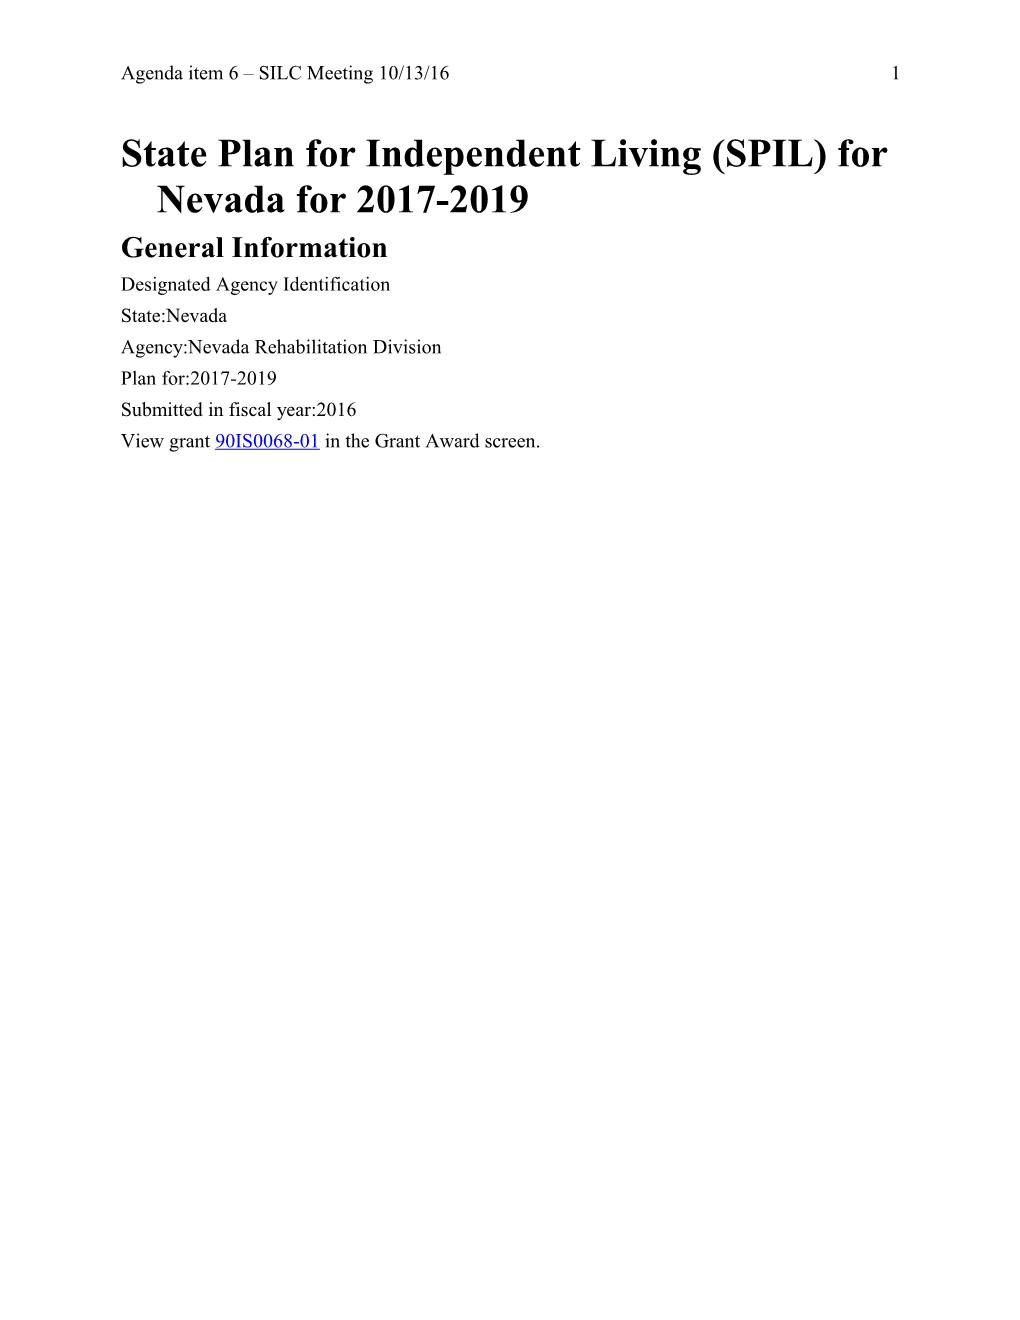 State Plan for Independent Living (SPIL) for Nevada for 2017-2019